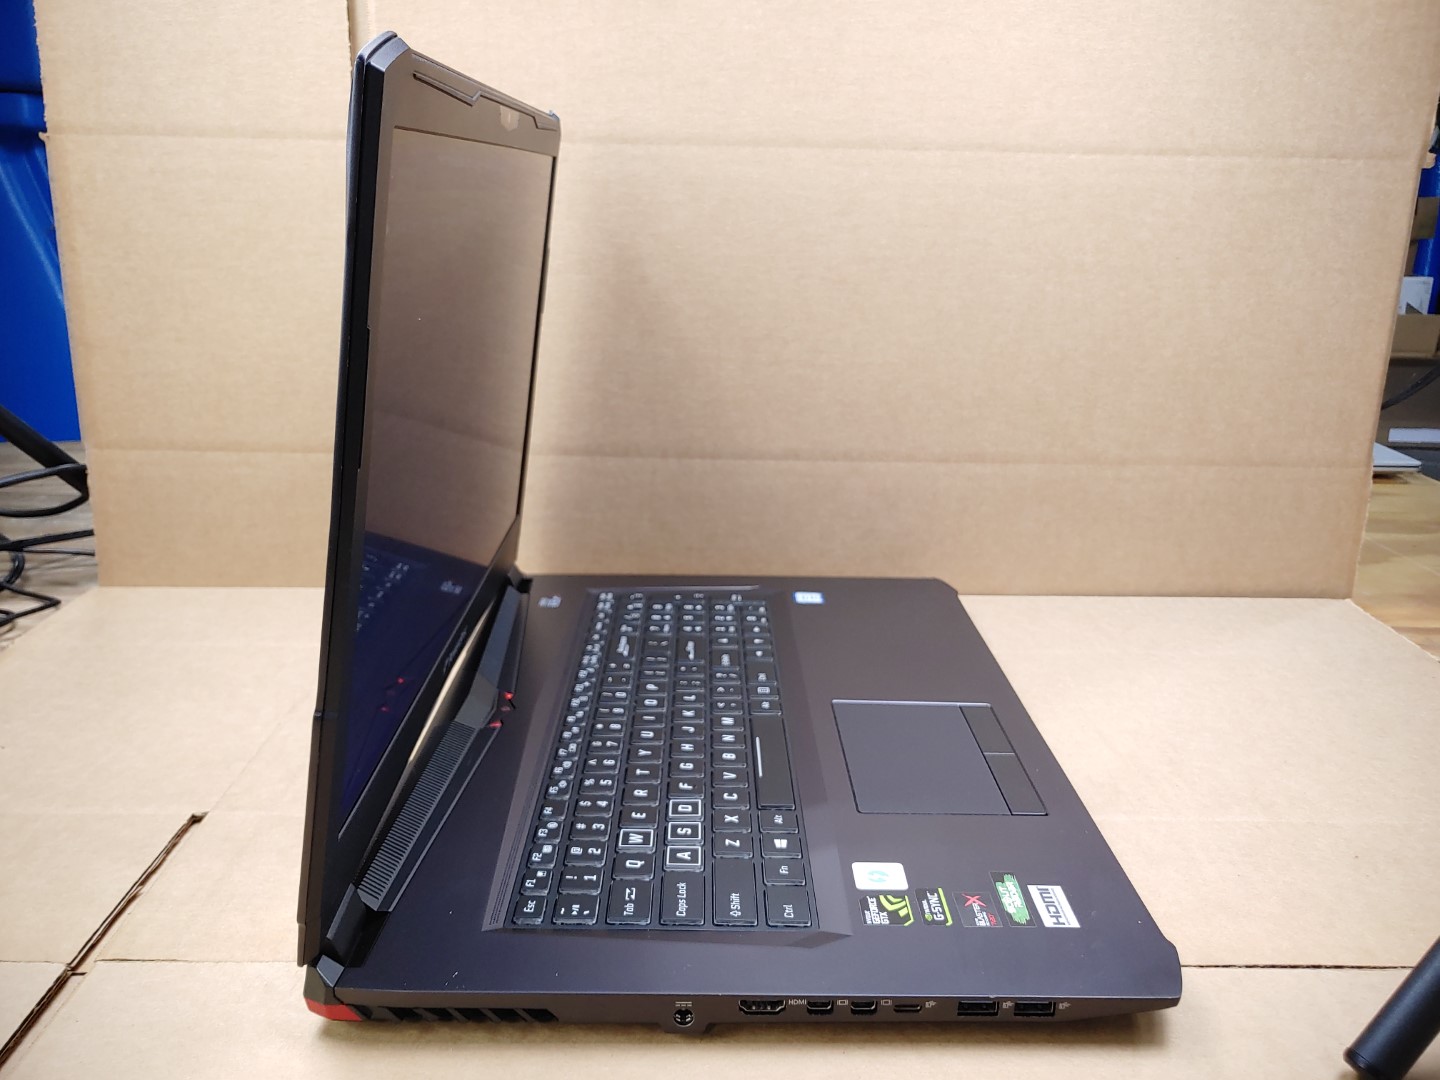 we have added actual images to this listing of the PowerSpec Laptop you would receive. **NO POWER ADAPTER / NO HDD or SSD**Item Specifics: MPN : PowerSpec 1710UPC : N/AType : LaptopBrand : PowerSpecProduct Line : GamingModel : PowerSpec 1710Operating System : N/AScreen Size : 17.3-inchProcessor Type : Intel Core i7-7700HQ 7th GenProcessor Speed : 2.80GHzGraphics Processing Type : NVIDIA GeForce GTX 1070 / Intel(R) HD Graphics 630Memory : 16GB (Single Stick)Hard Drive Capacity : N/A - 1